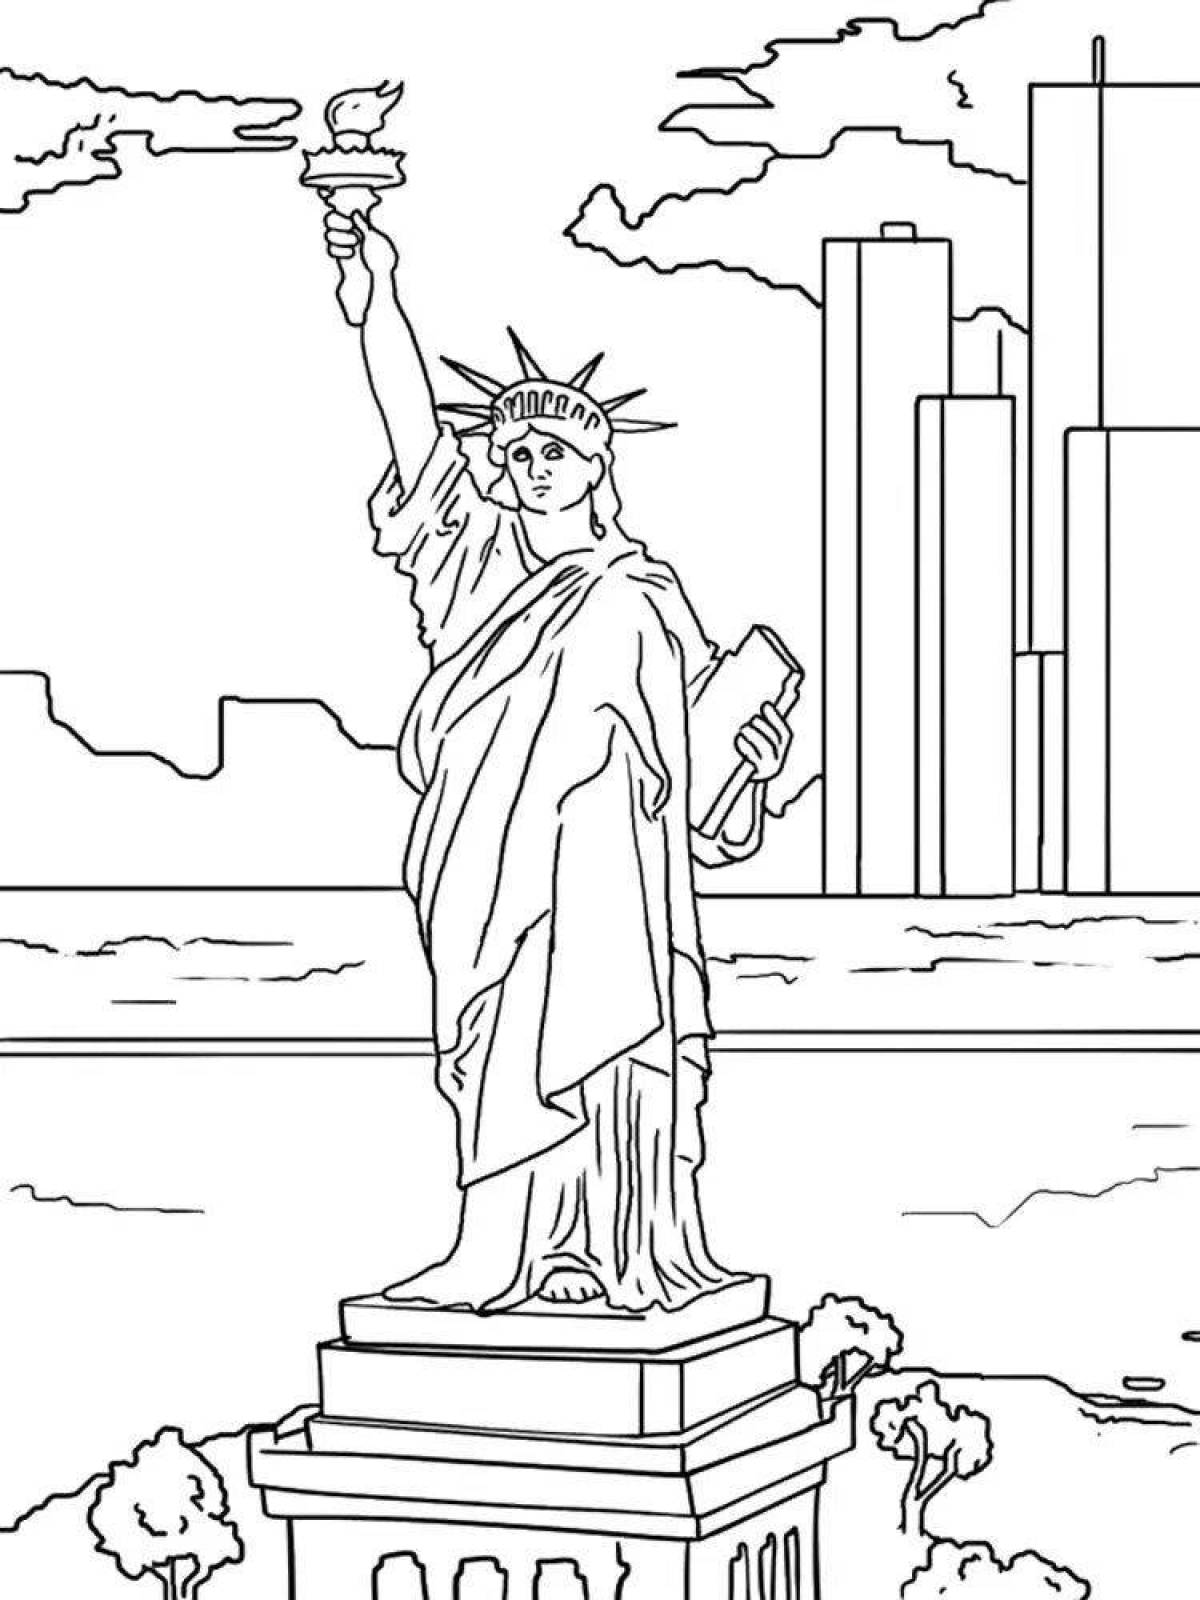 Colorful statue coloring page